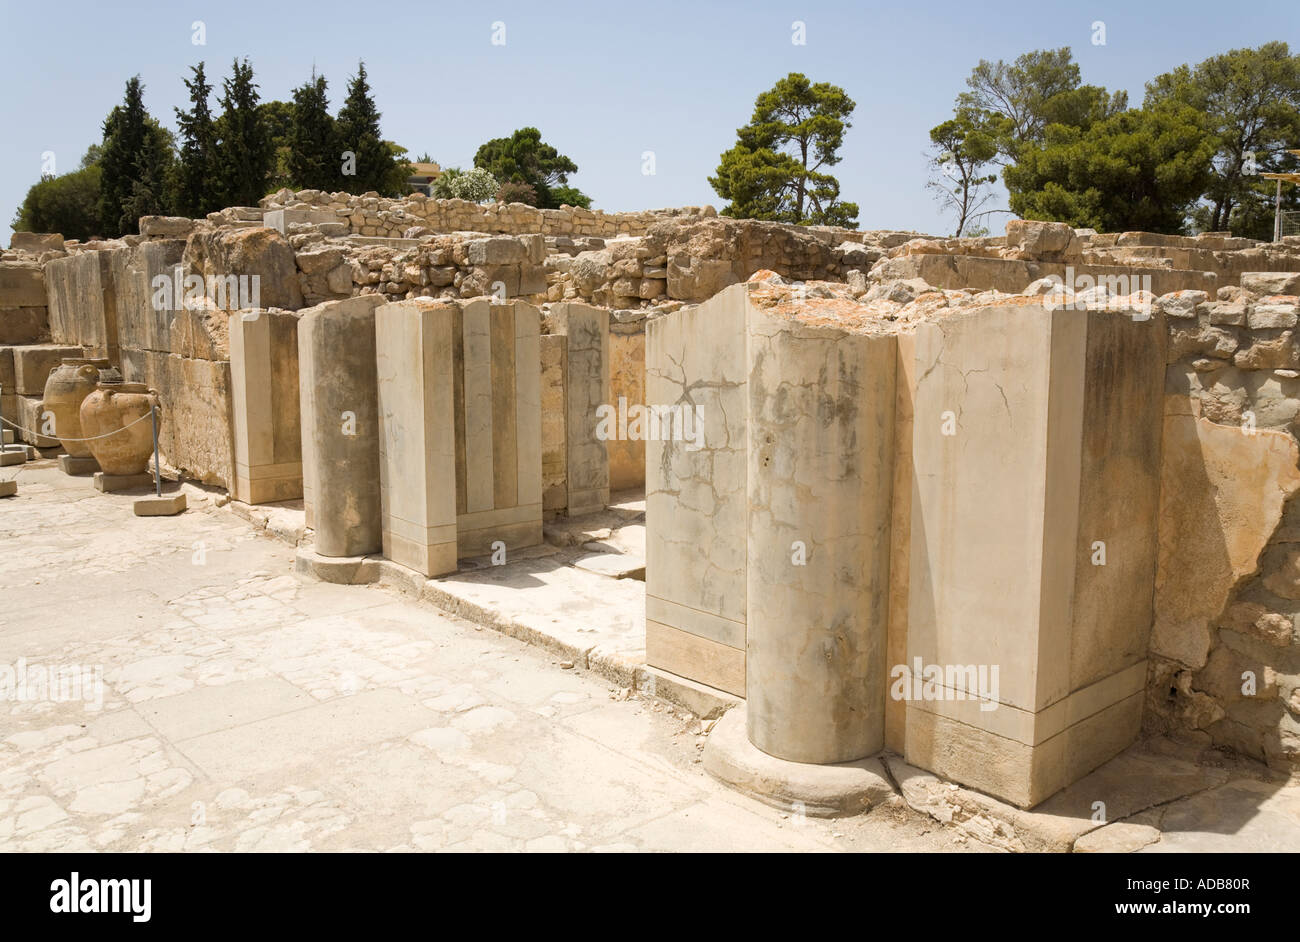 A section of the archeological excavation site of the Minoan palaces of Festos / Crete / Greece Stock Photo